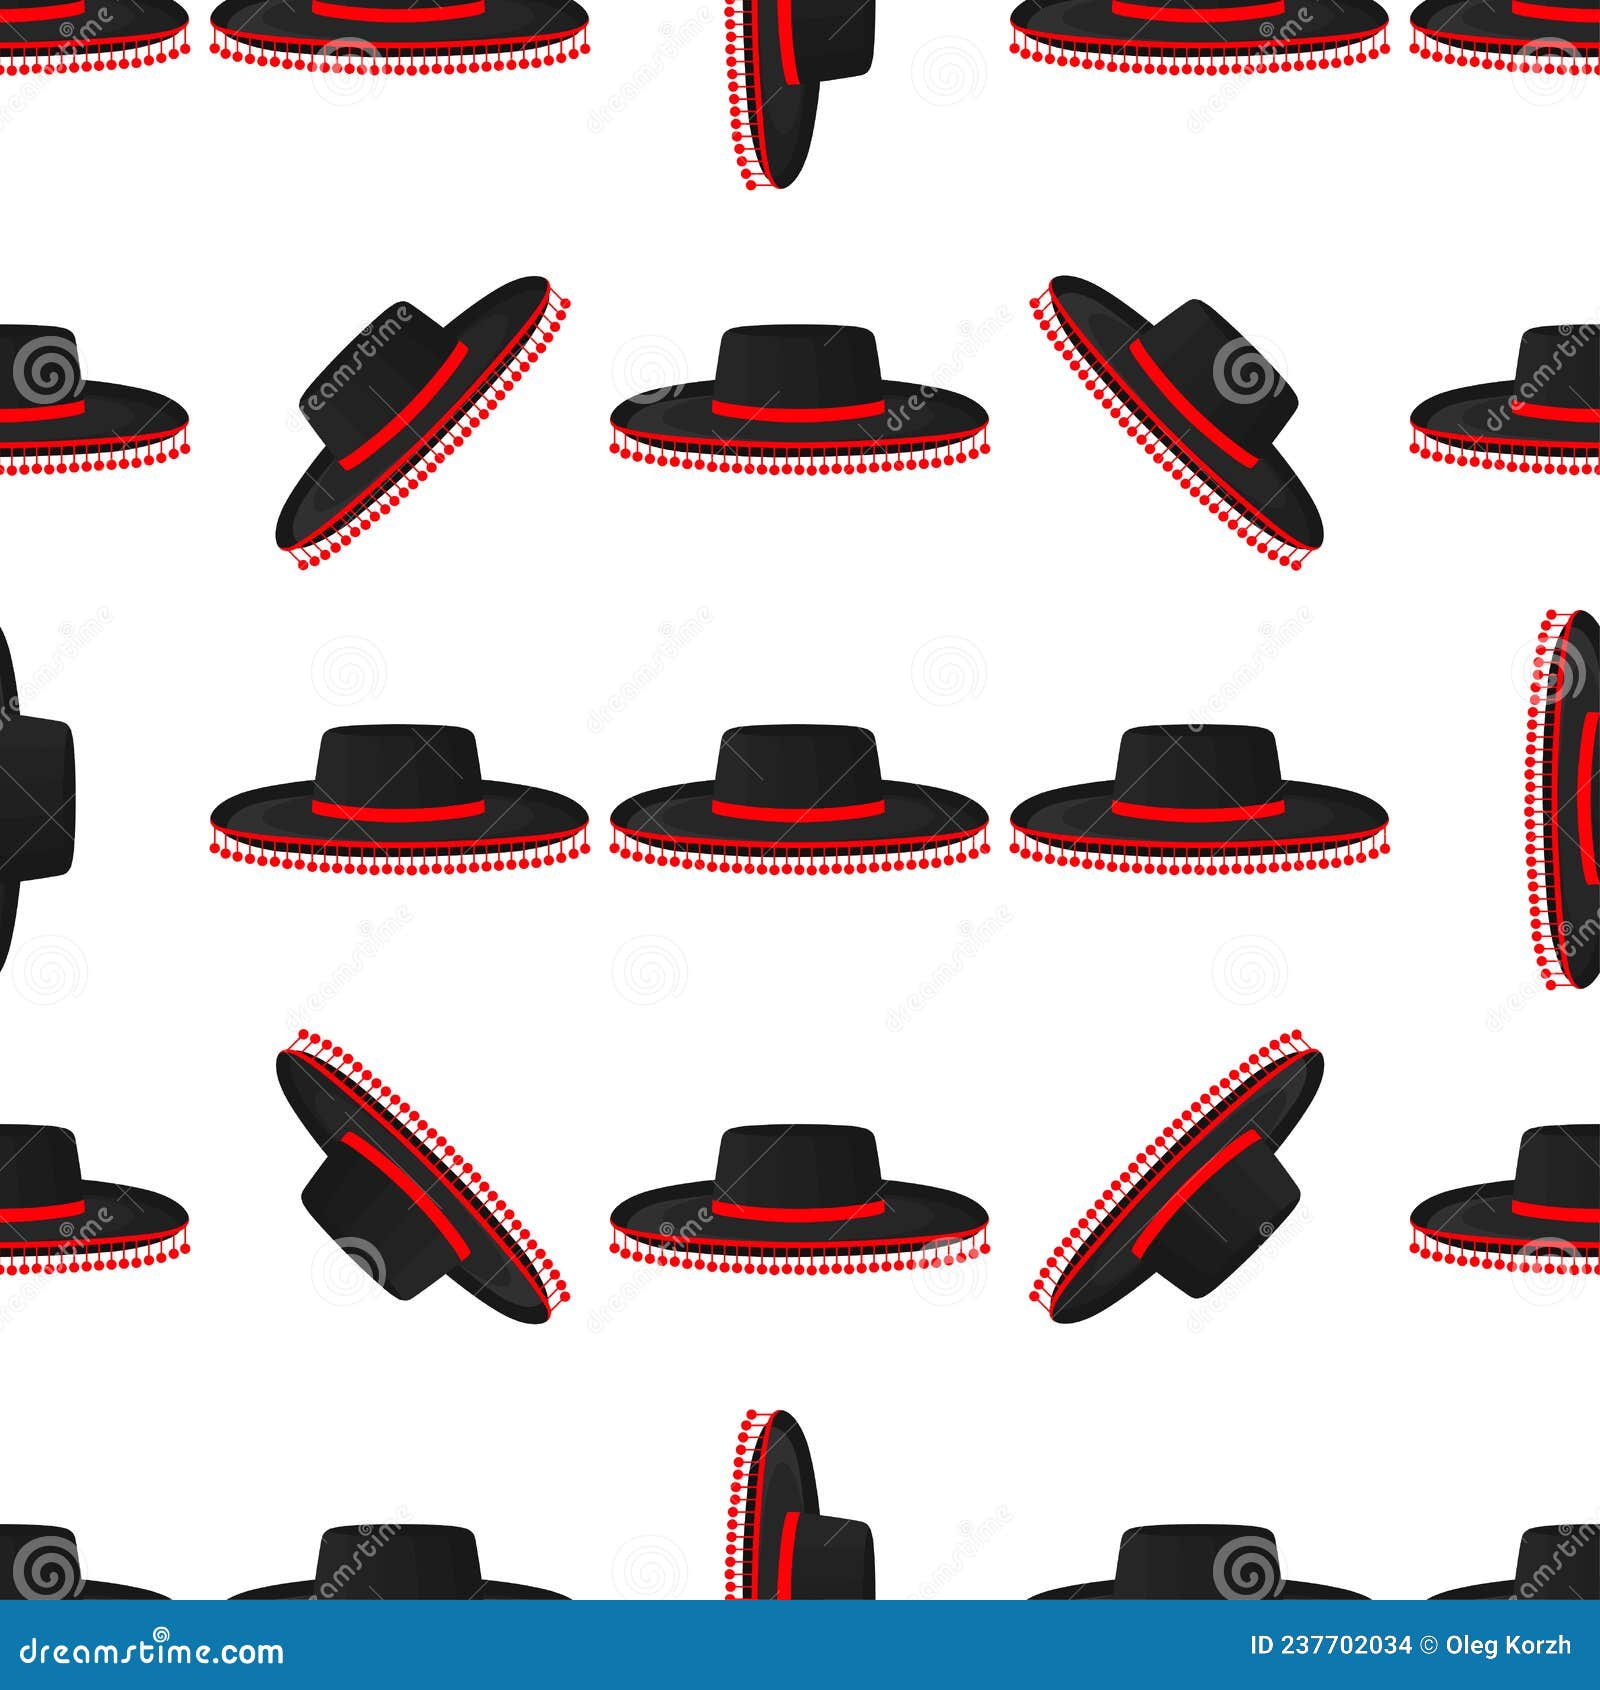  on theme pattern mexican hats sombrero